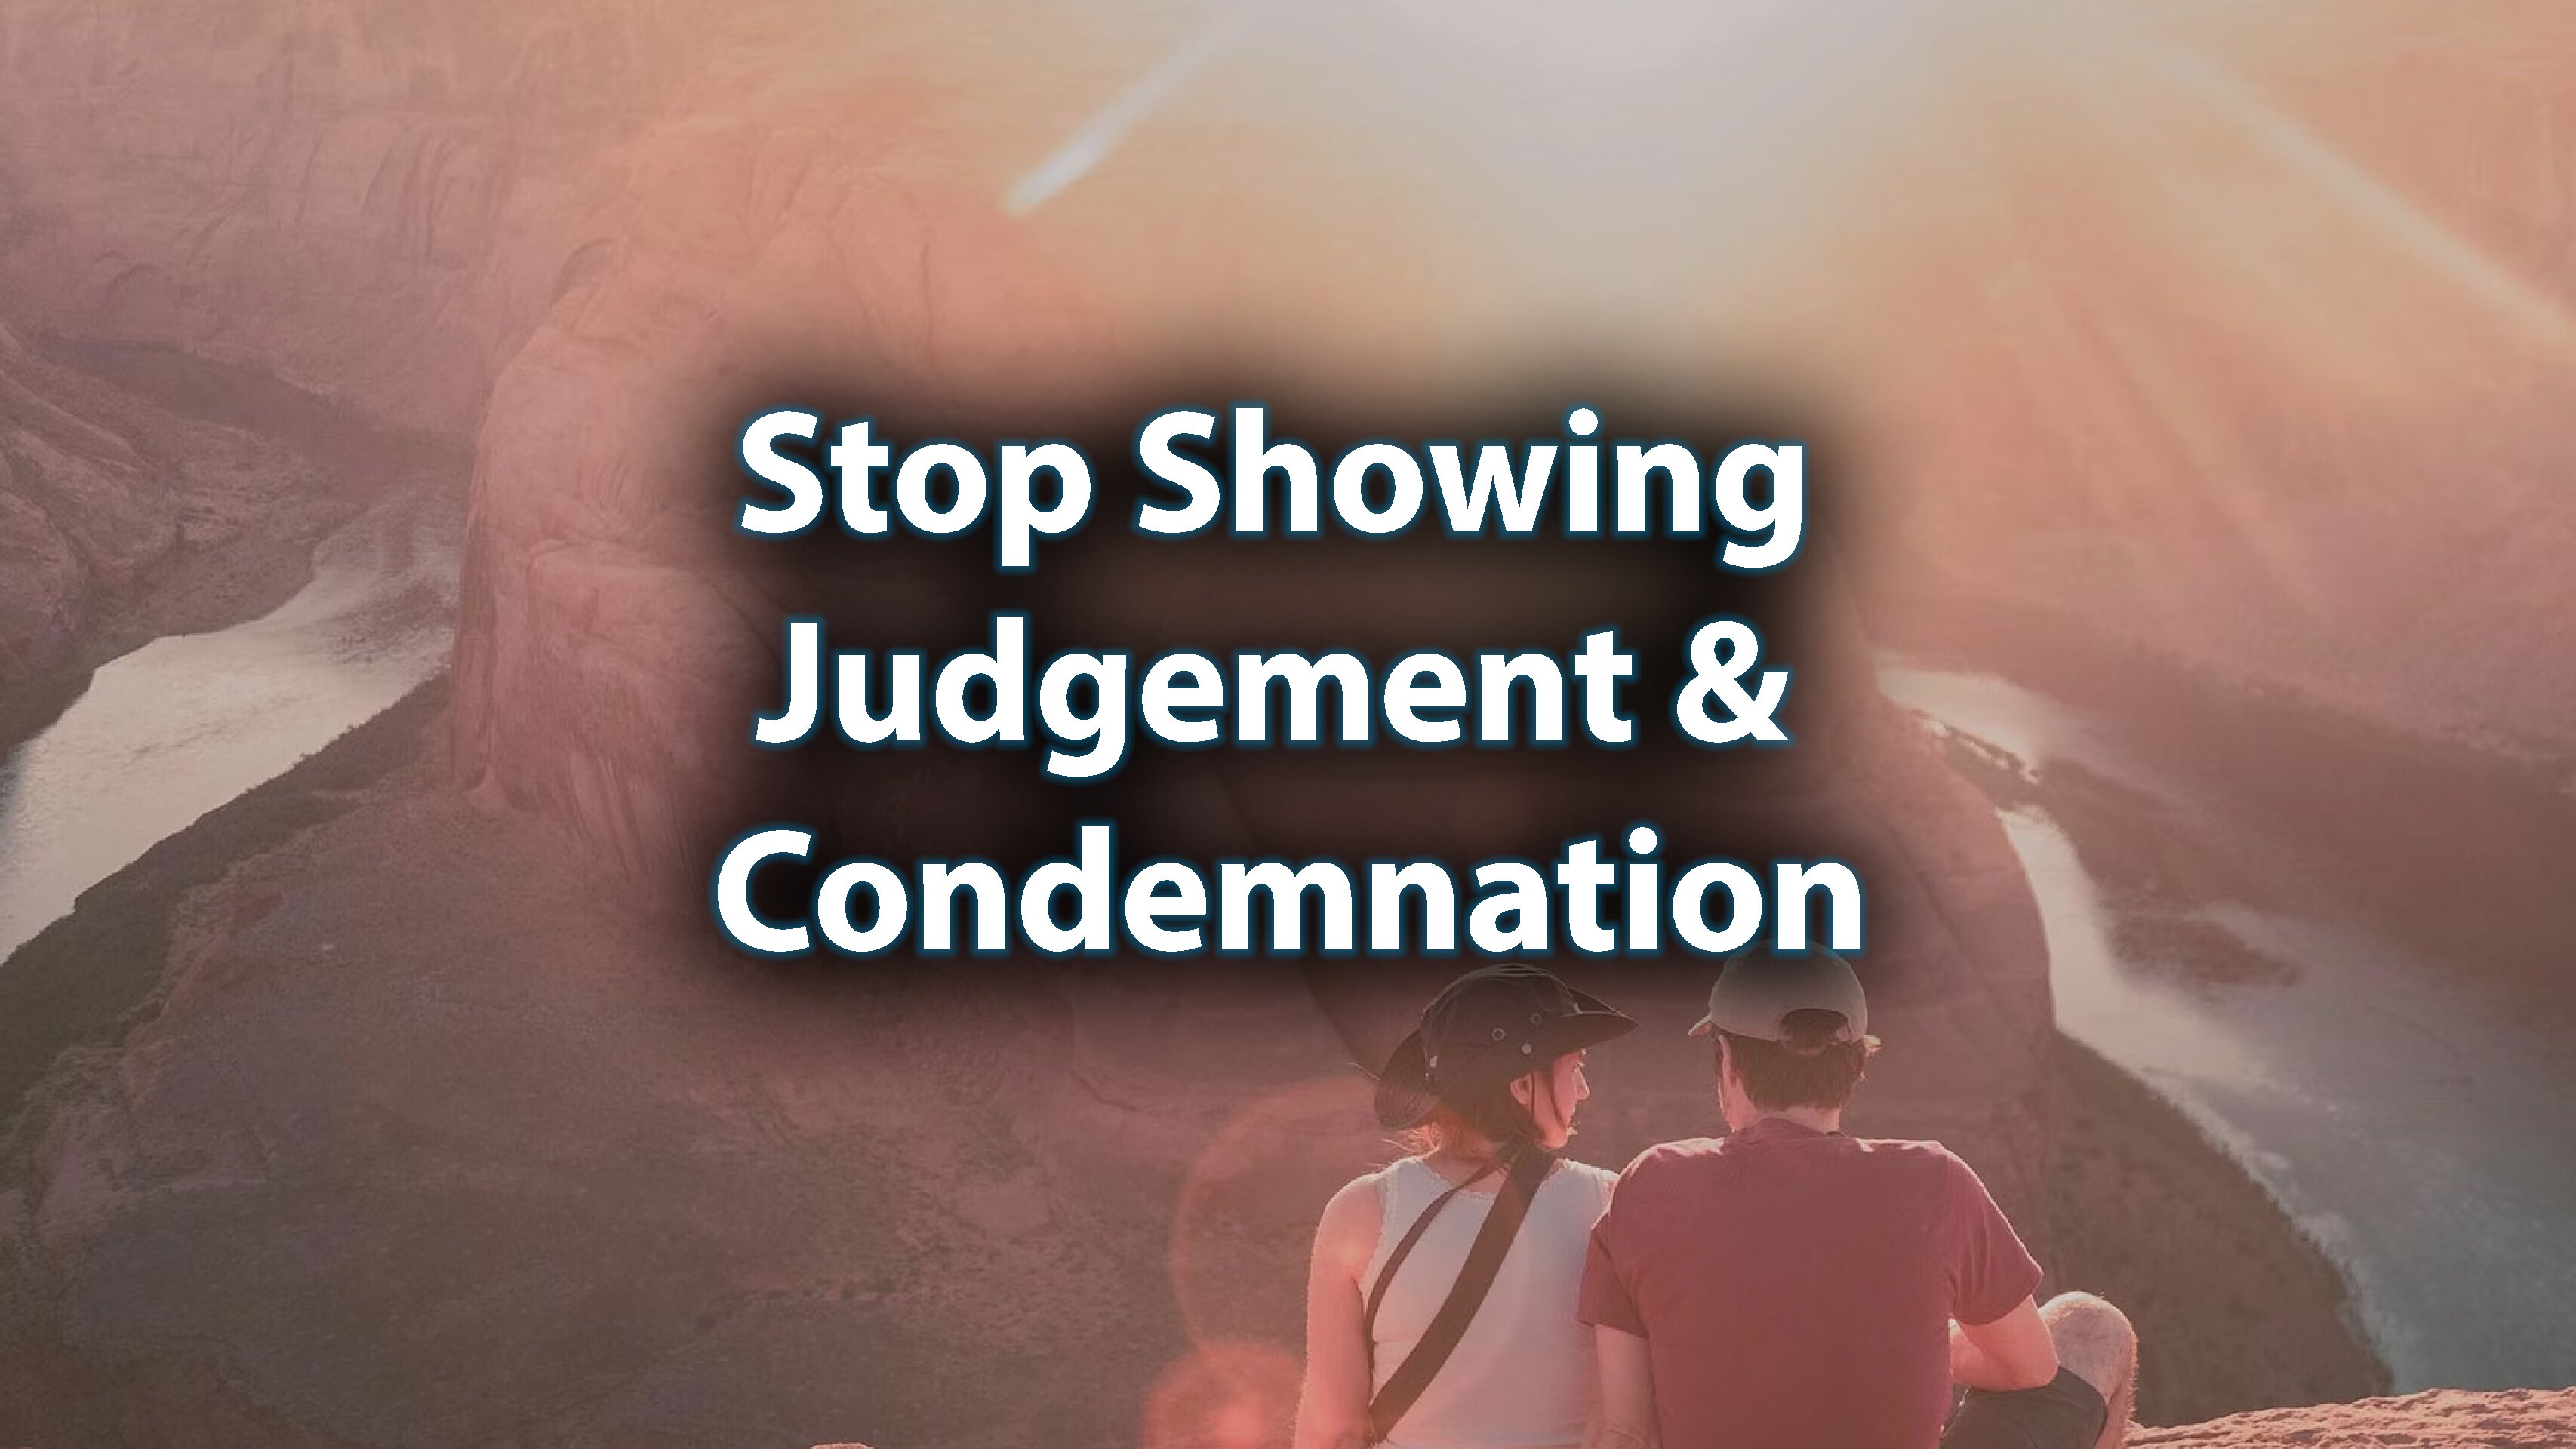 Day 26: How to Stop Showing Judgement & Condemnation